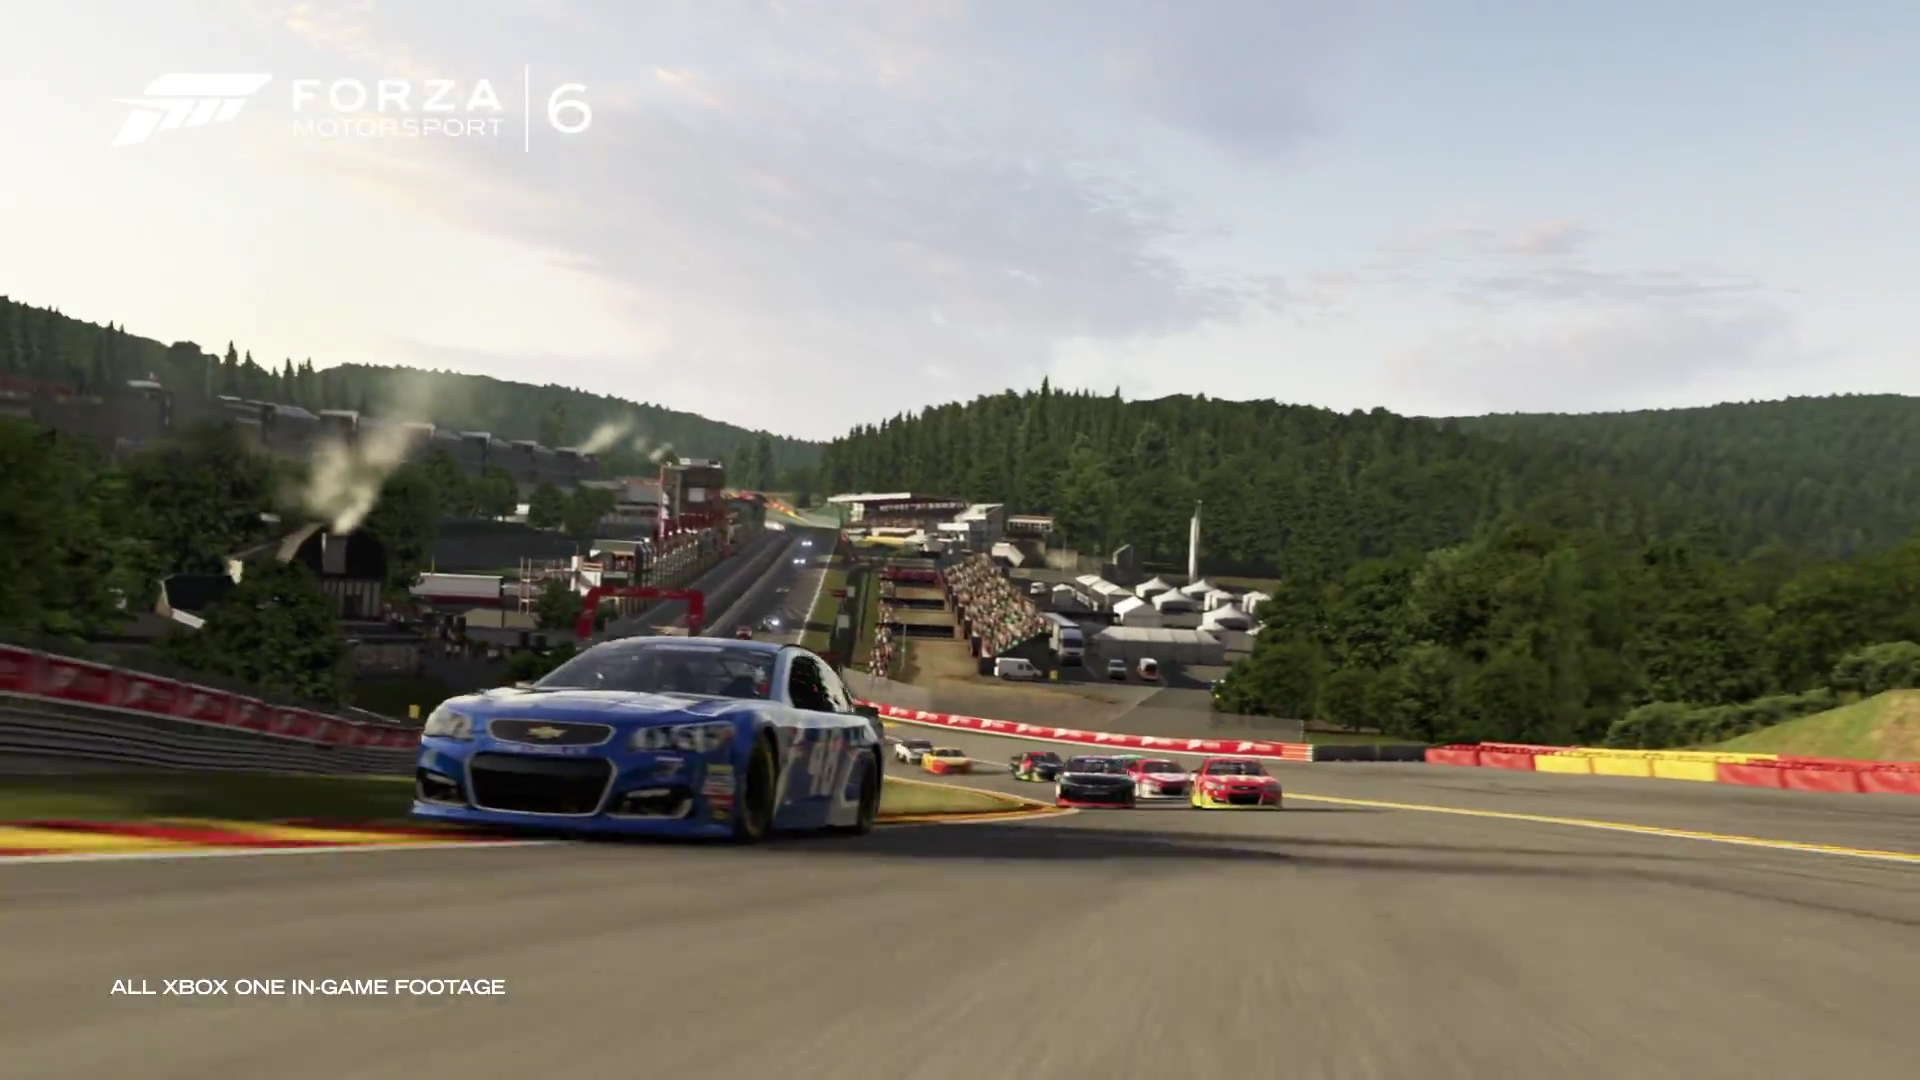 Forza 6 NASCAR Expansion Out Now, Watch First Trailer - GameSpot